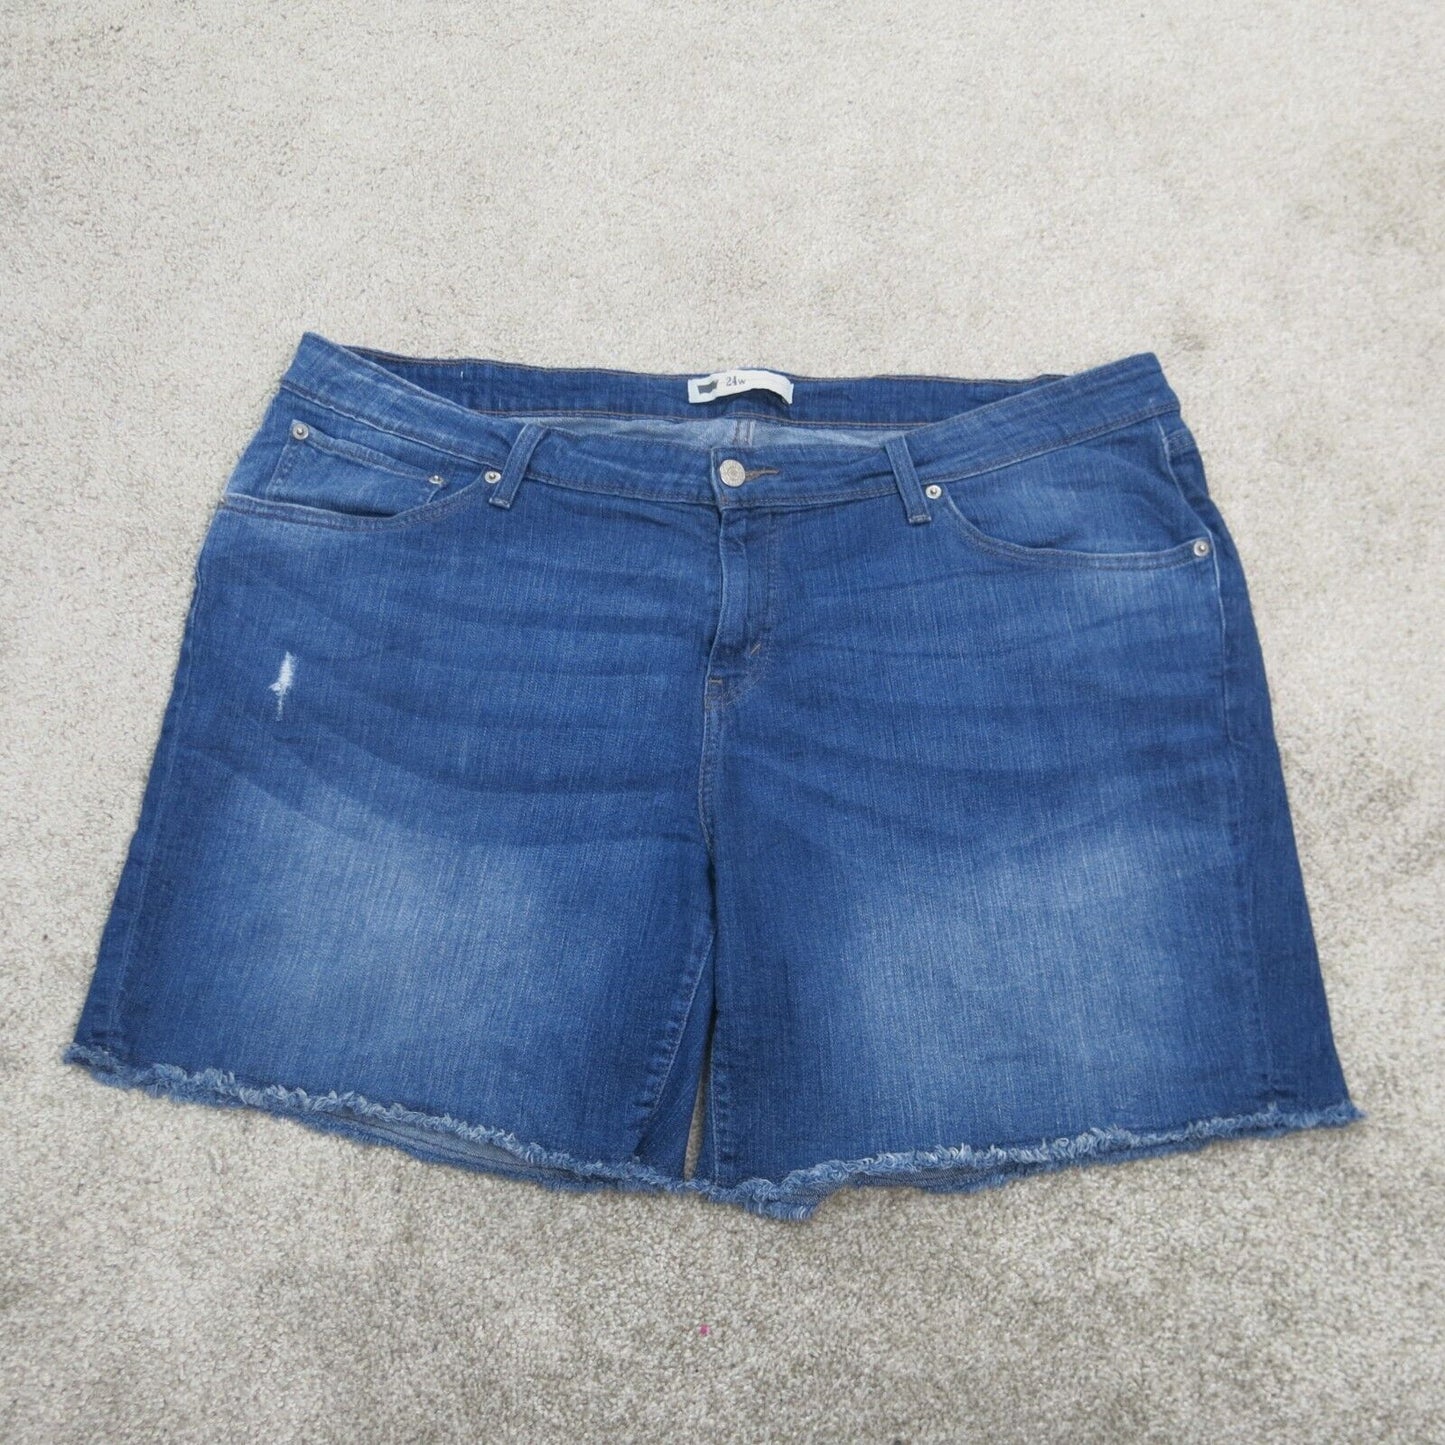 Levis Womens Cut Off Jeans Shorts High Rise Flat Front Pull On Blue Size W24